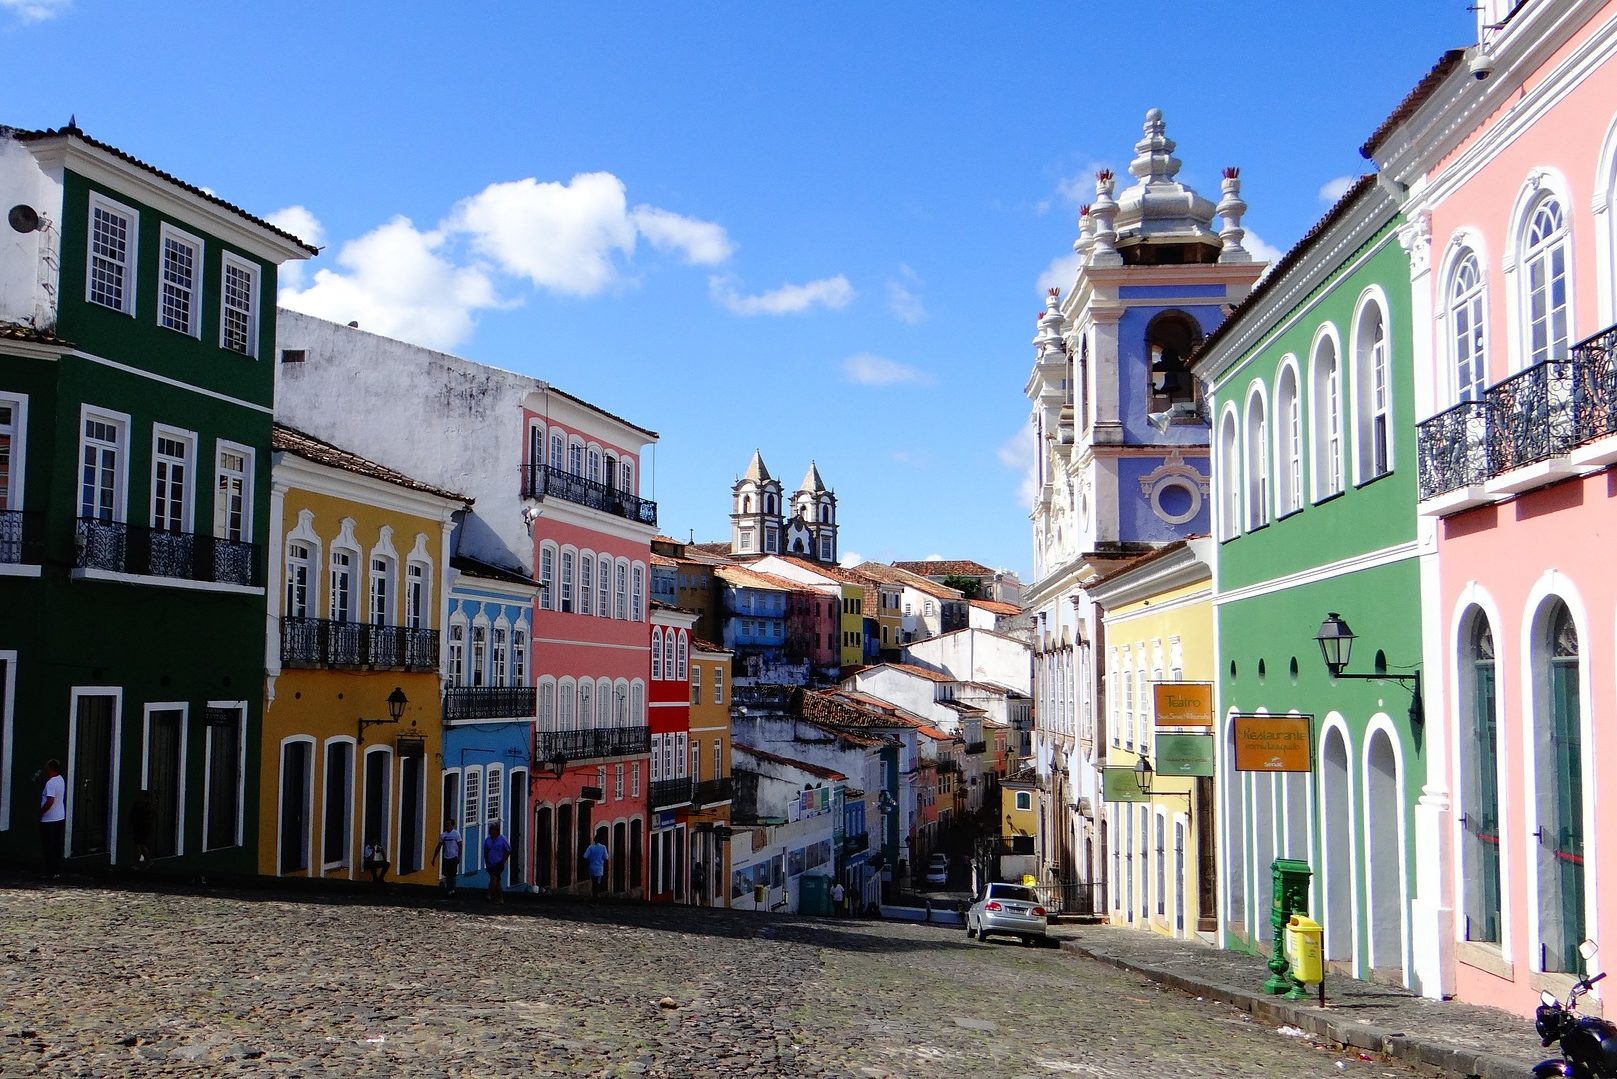 Salvador is the capital of Brazil’s northeastern state of Bahia.